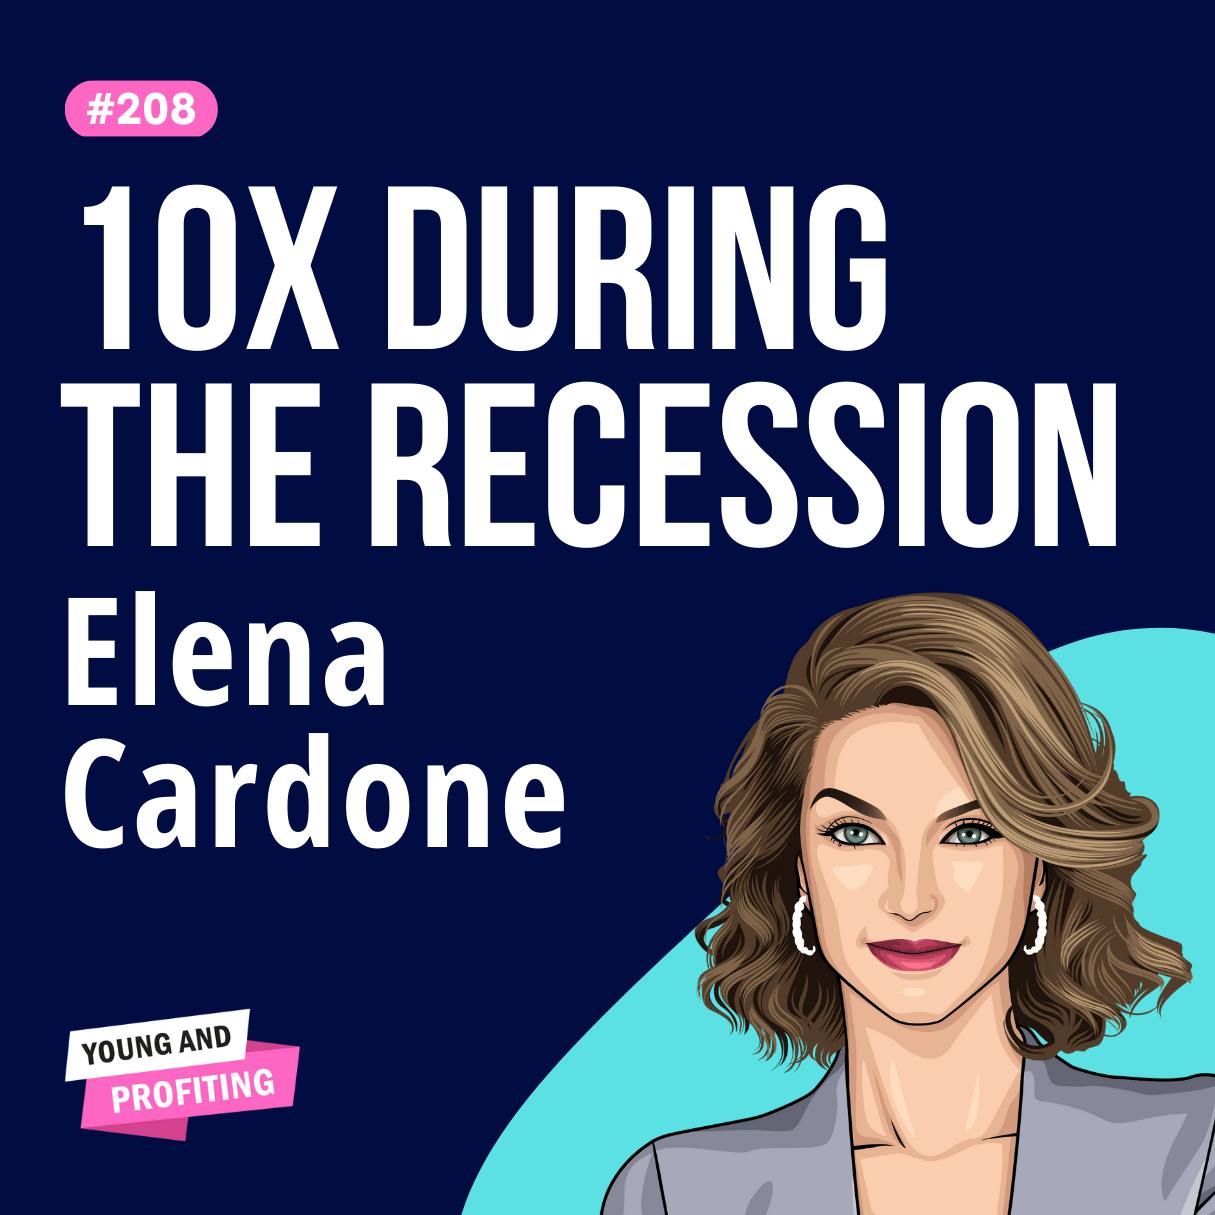 Elena Cardone: How to Find a Partner, 10X Your Life, and Build a Real Estate Empire | E208 by Hala Taha | YAP Media Network